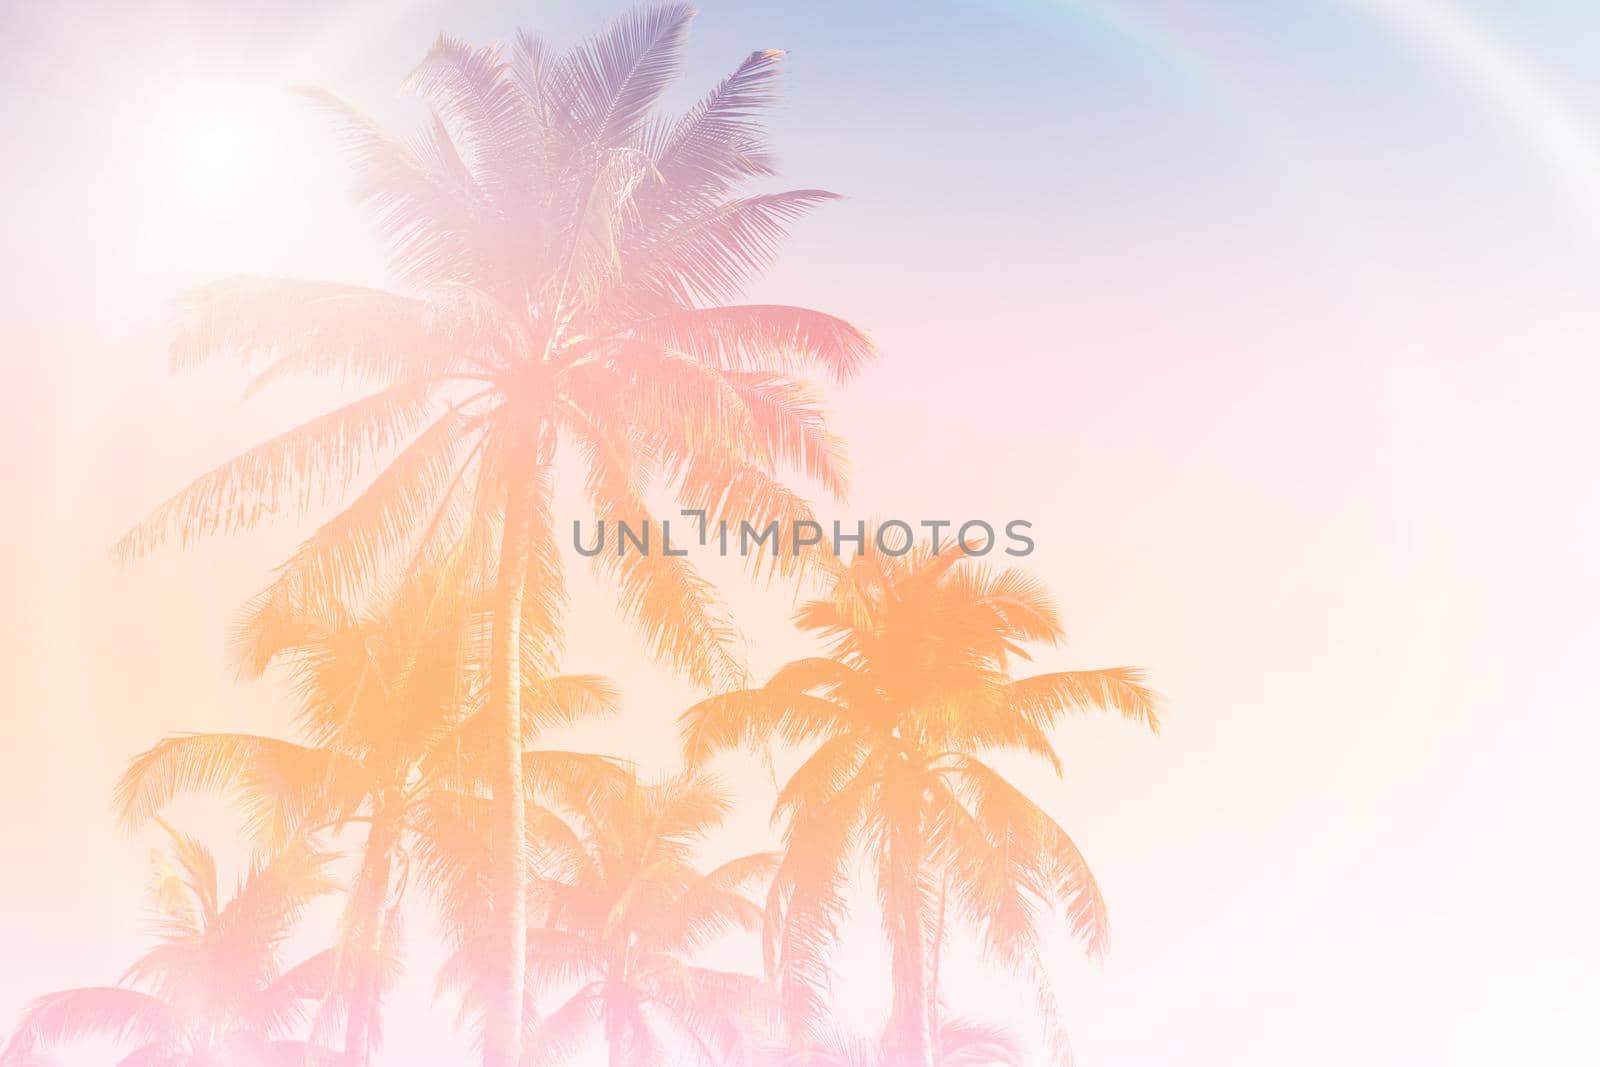 Tropical palm coconut trees on sunset sky flare and bokeh nature colorful background.